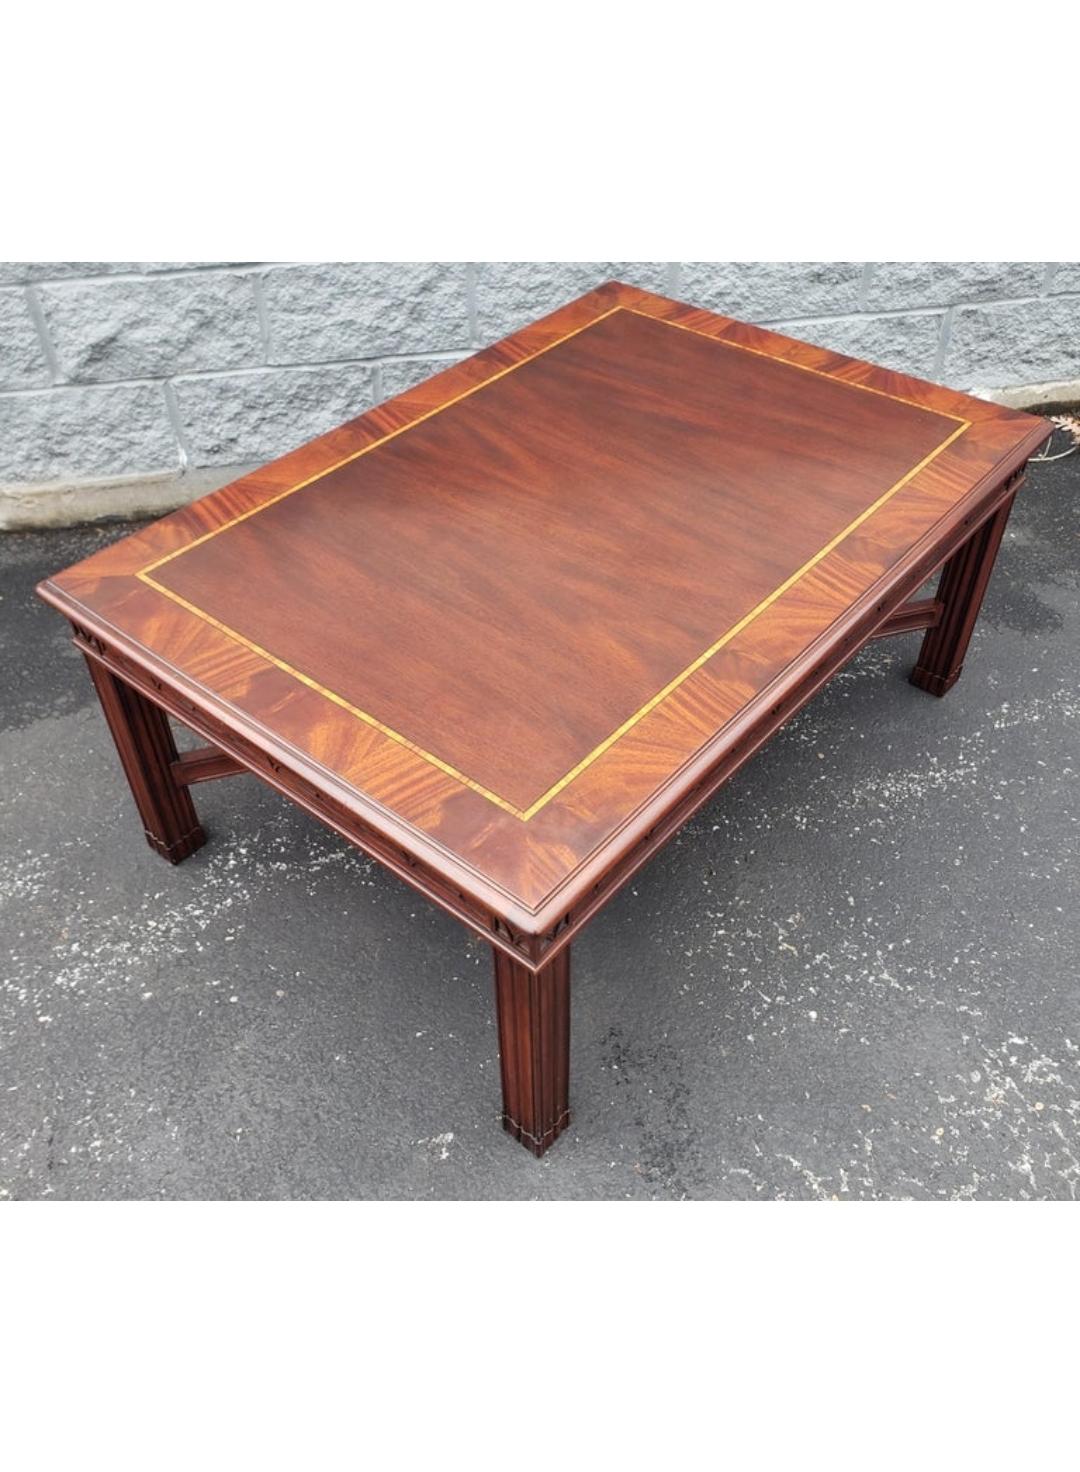 American Henkel Harris Chippendale Mahogany and Tulipwood Inlay Coffee Table w/ Fretwork For Sale